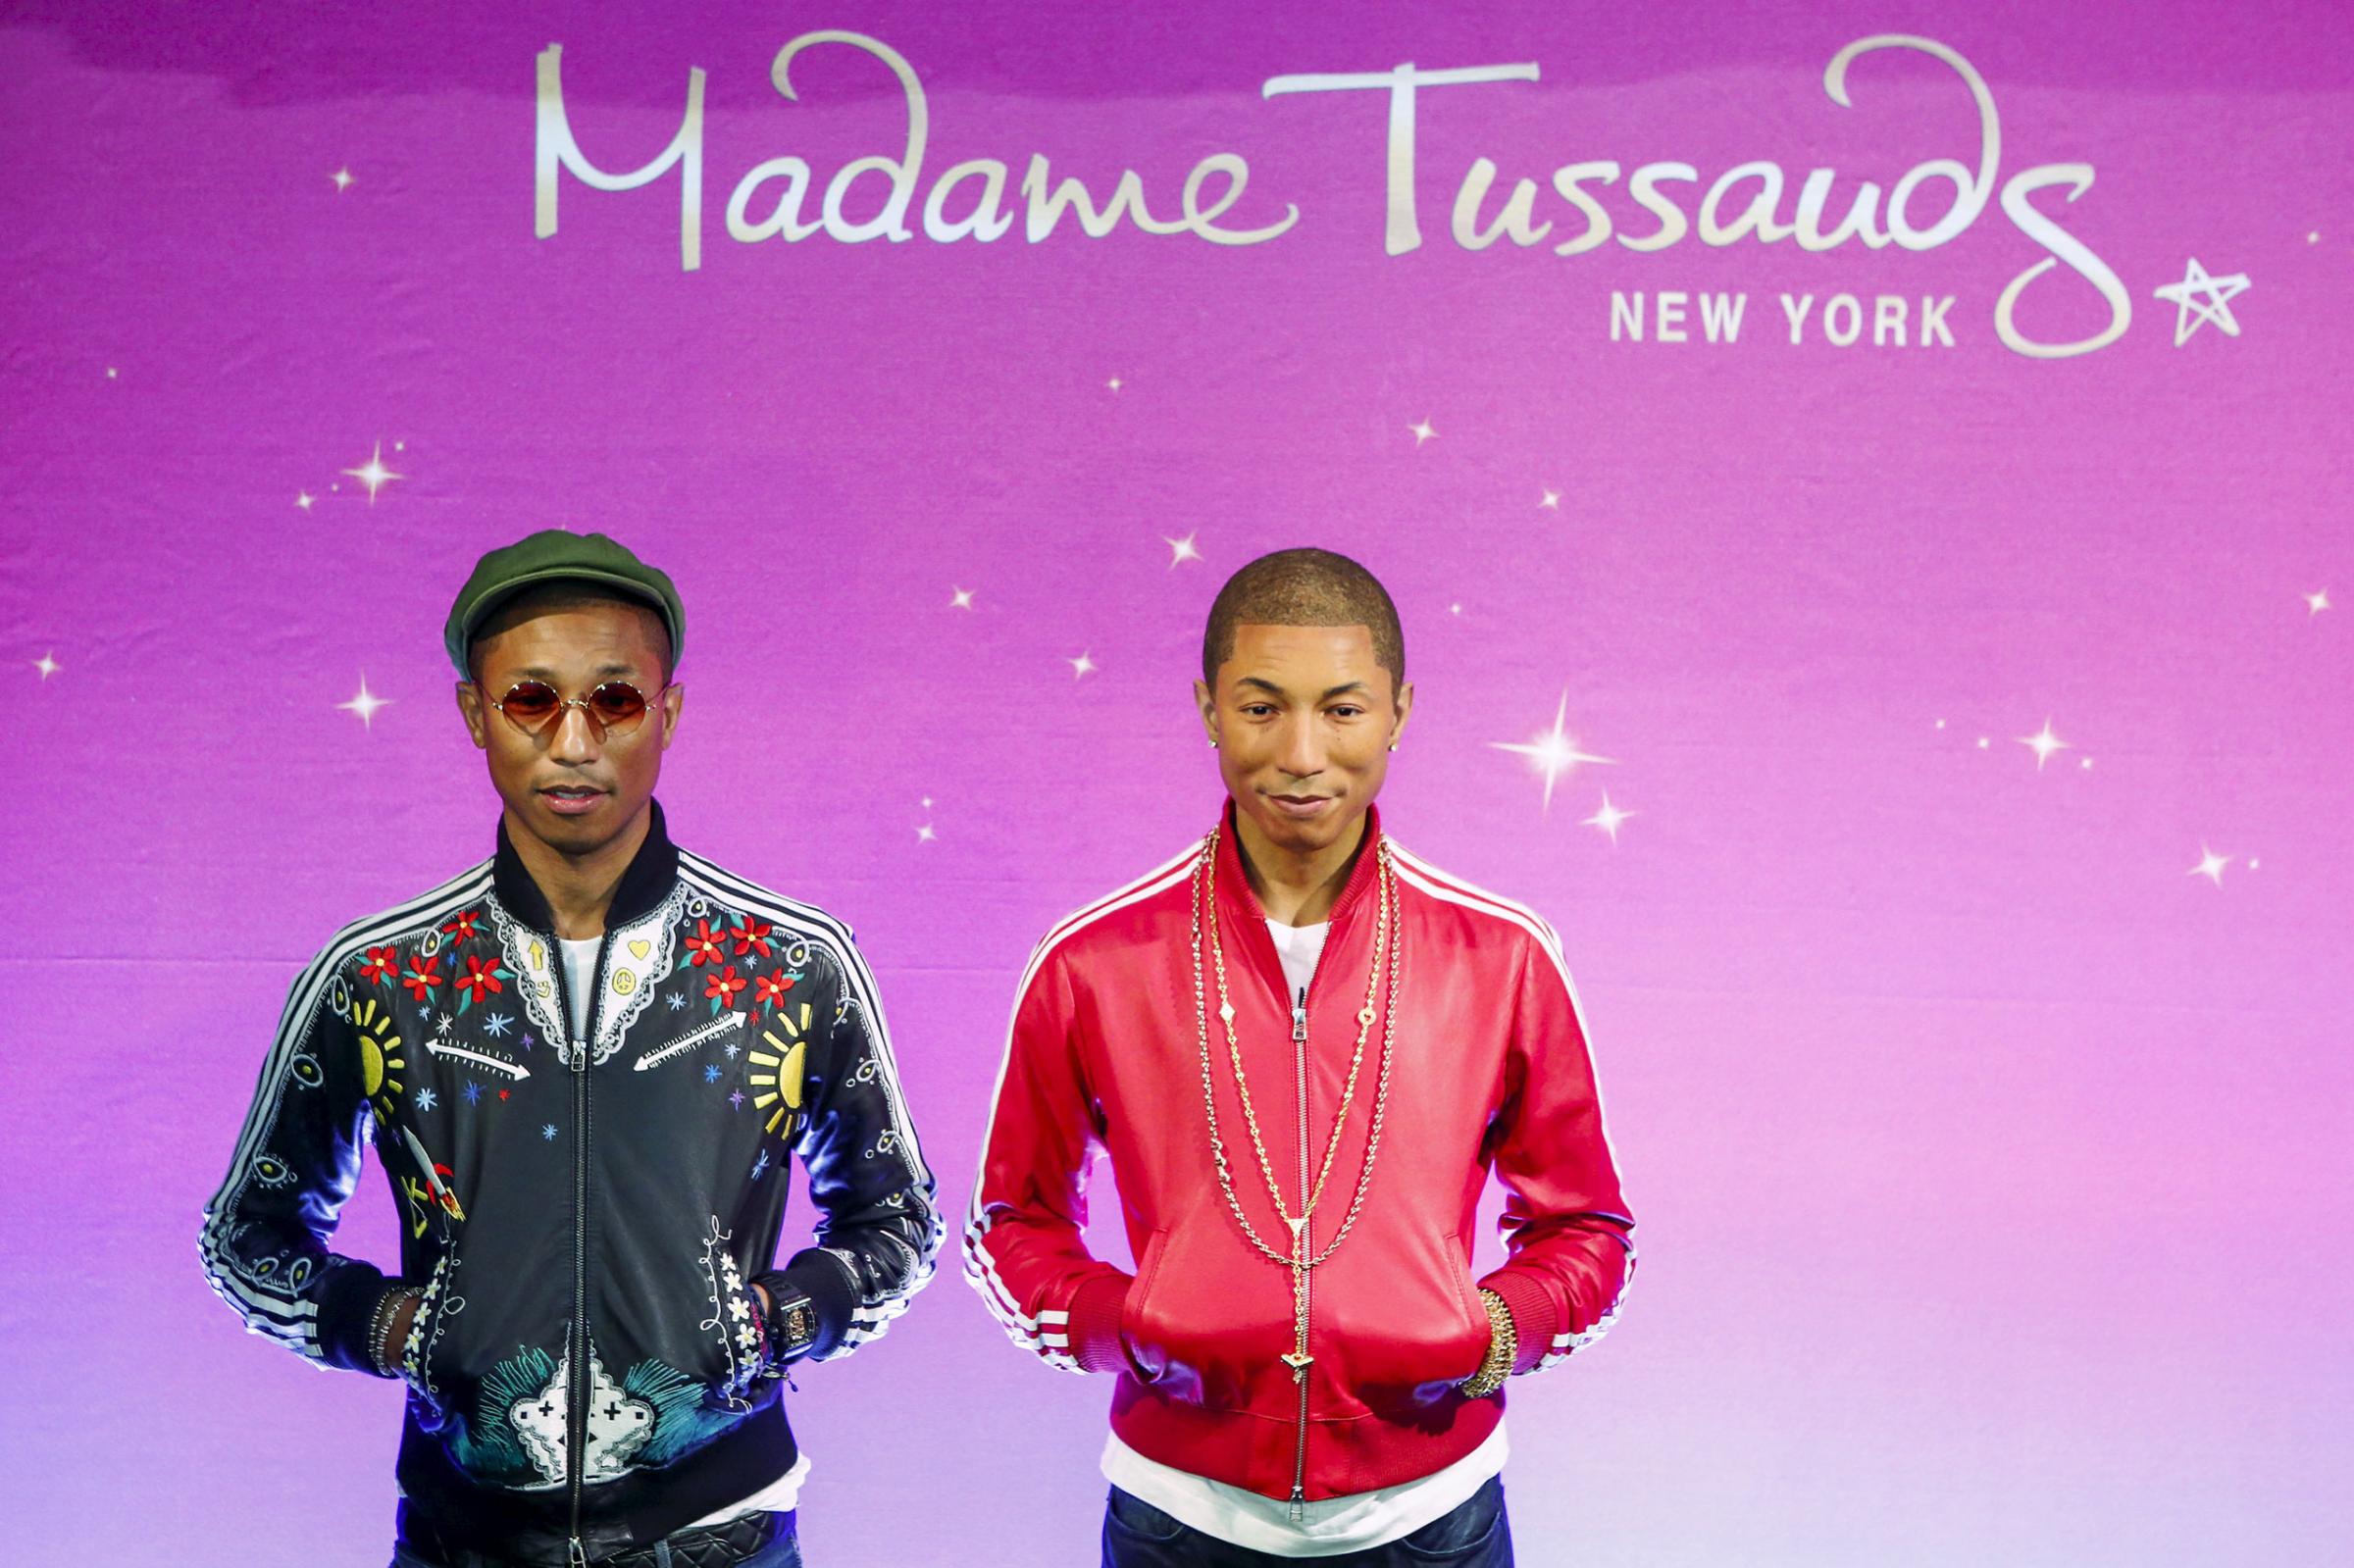 Musician Williams poses next to his wax double at Madame Tussauds in New York